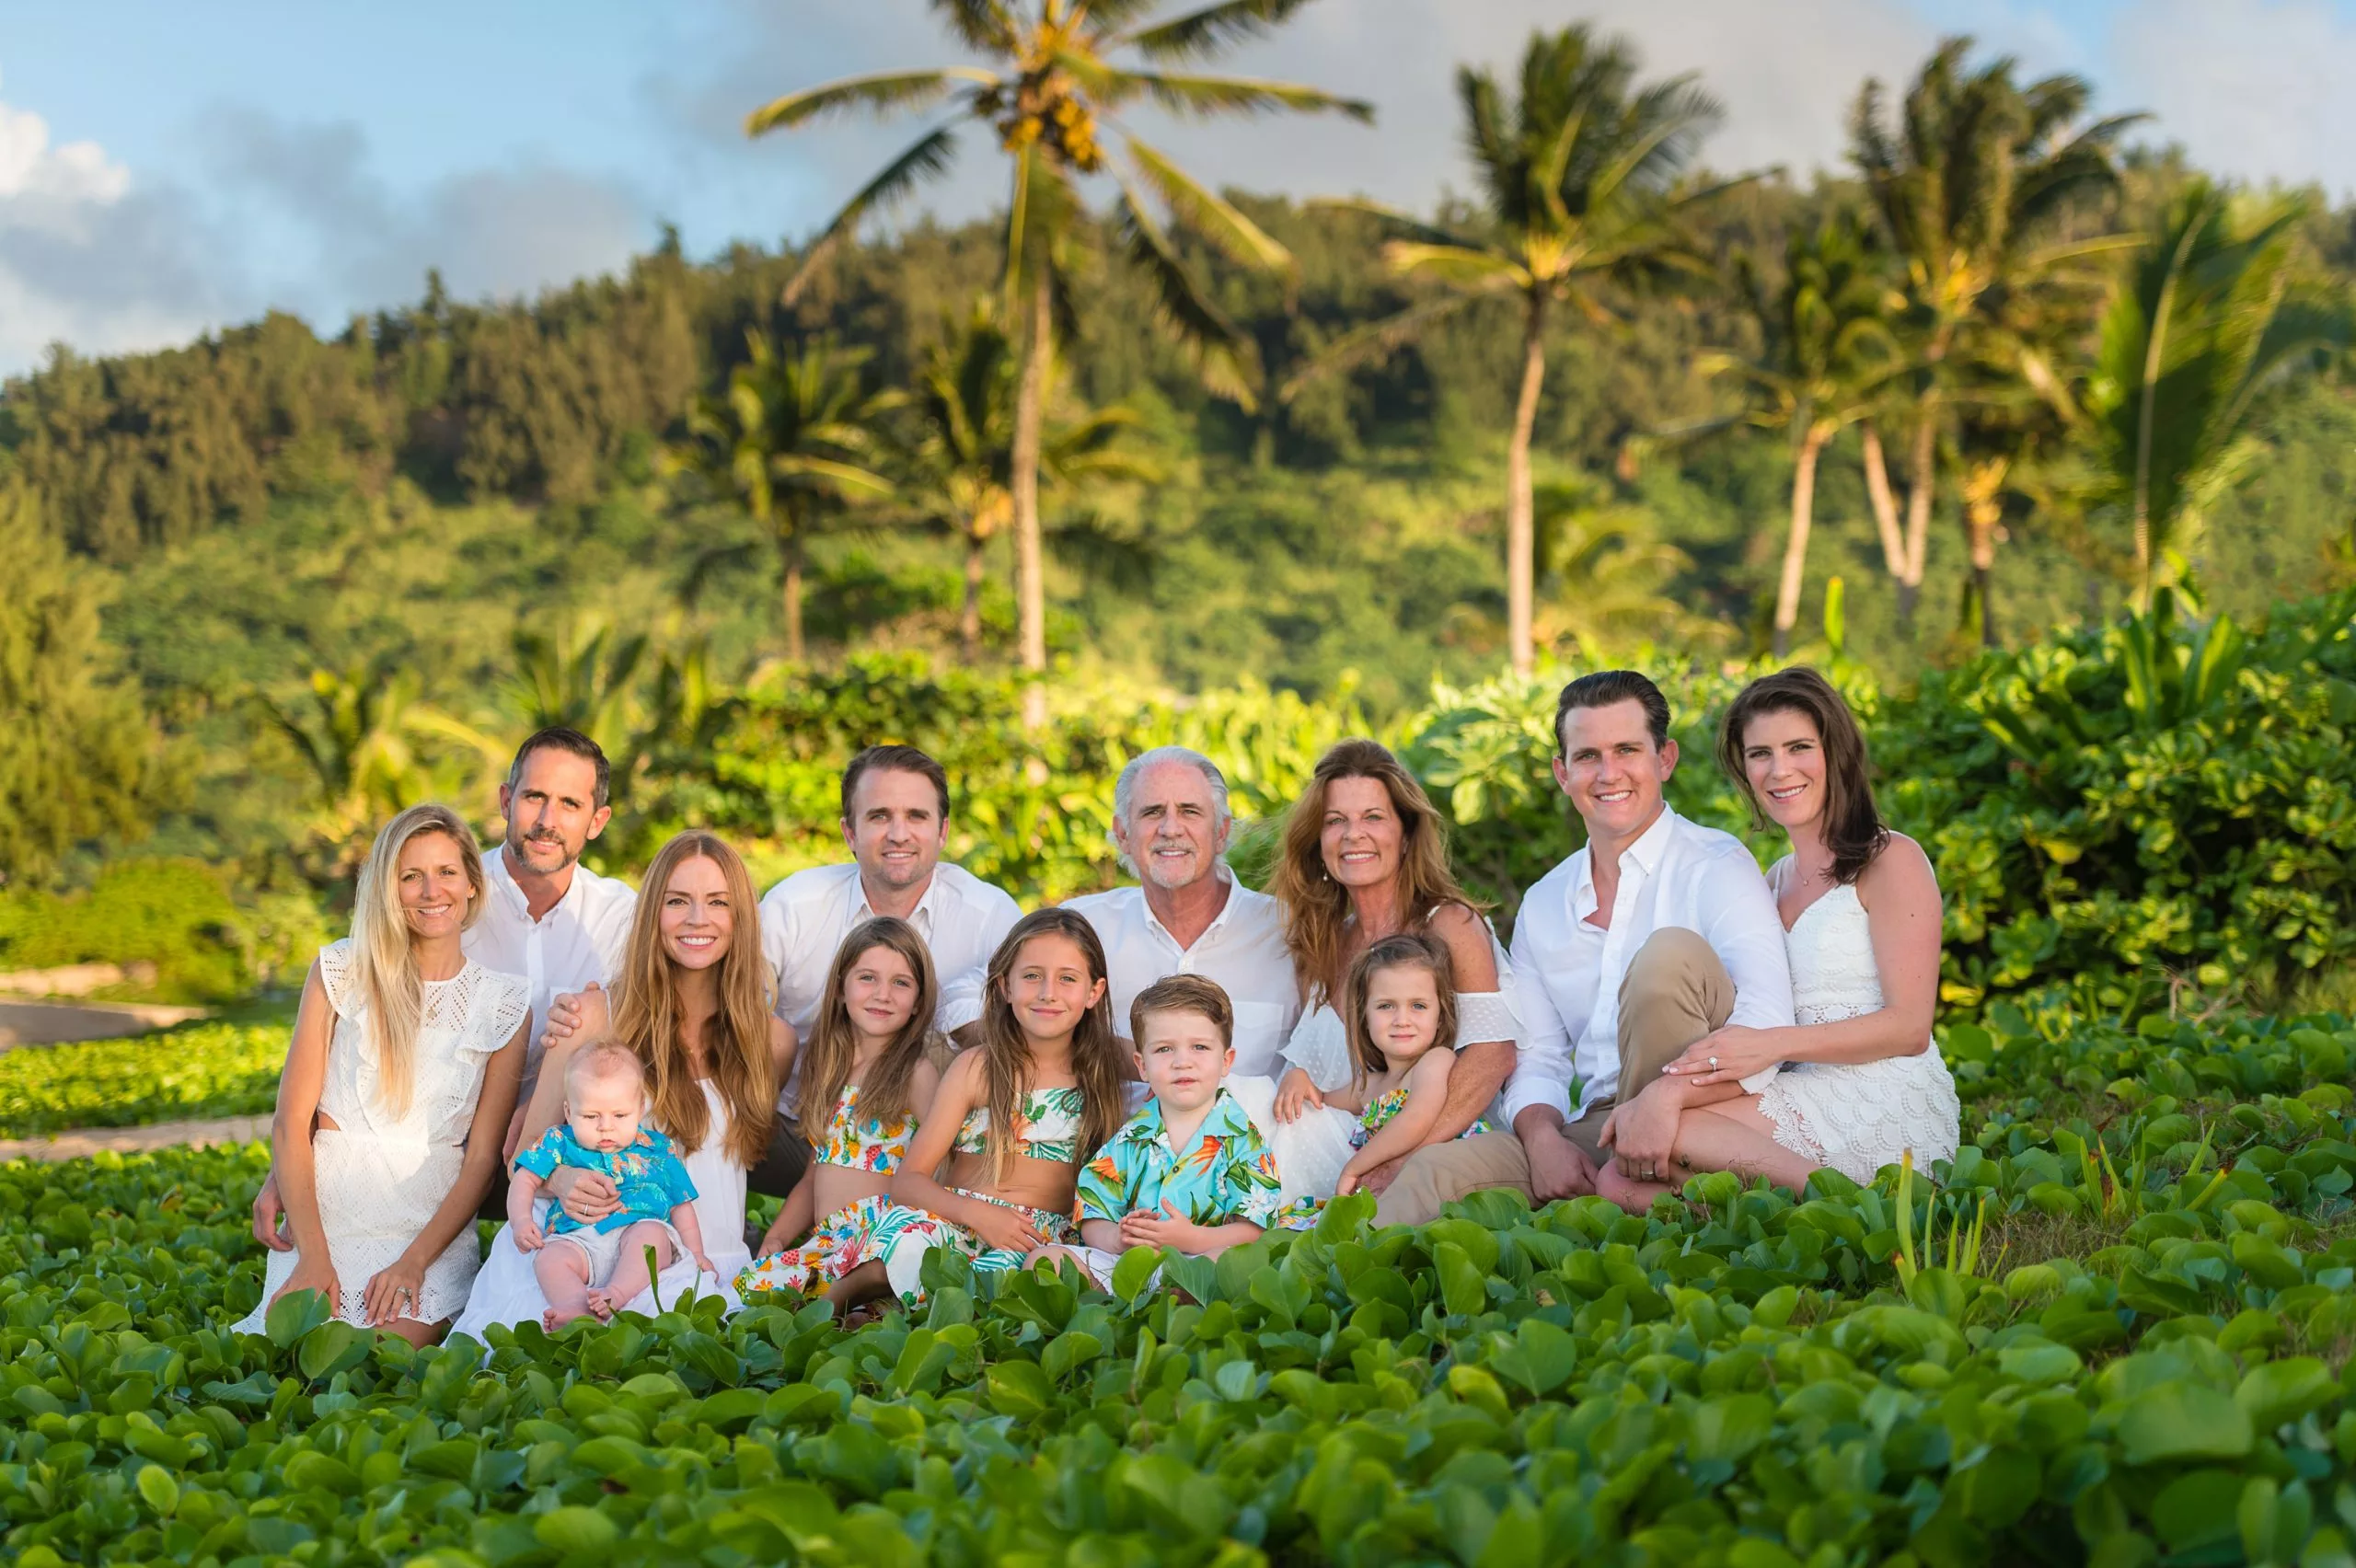 A vacation family photoshoot done by oahu hawaii photography